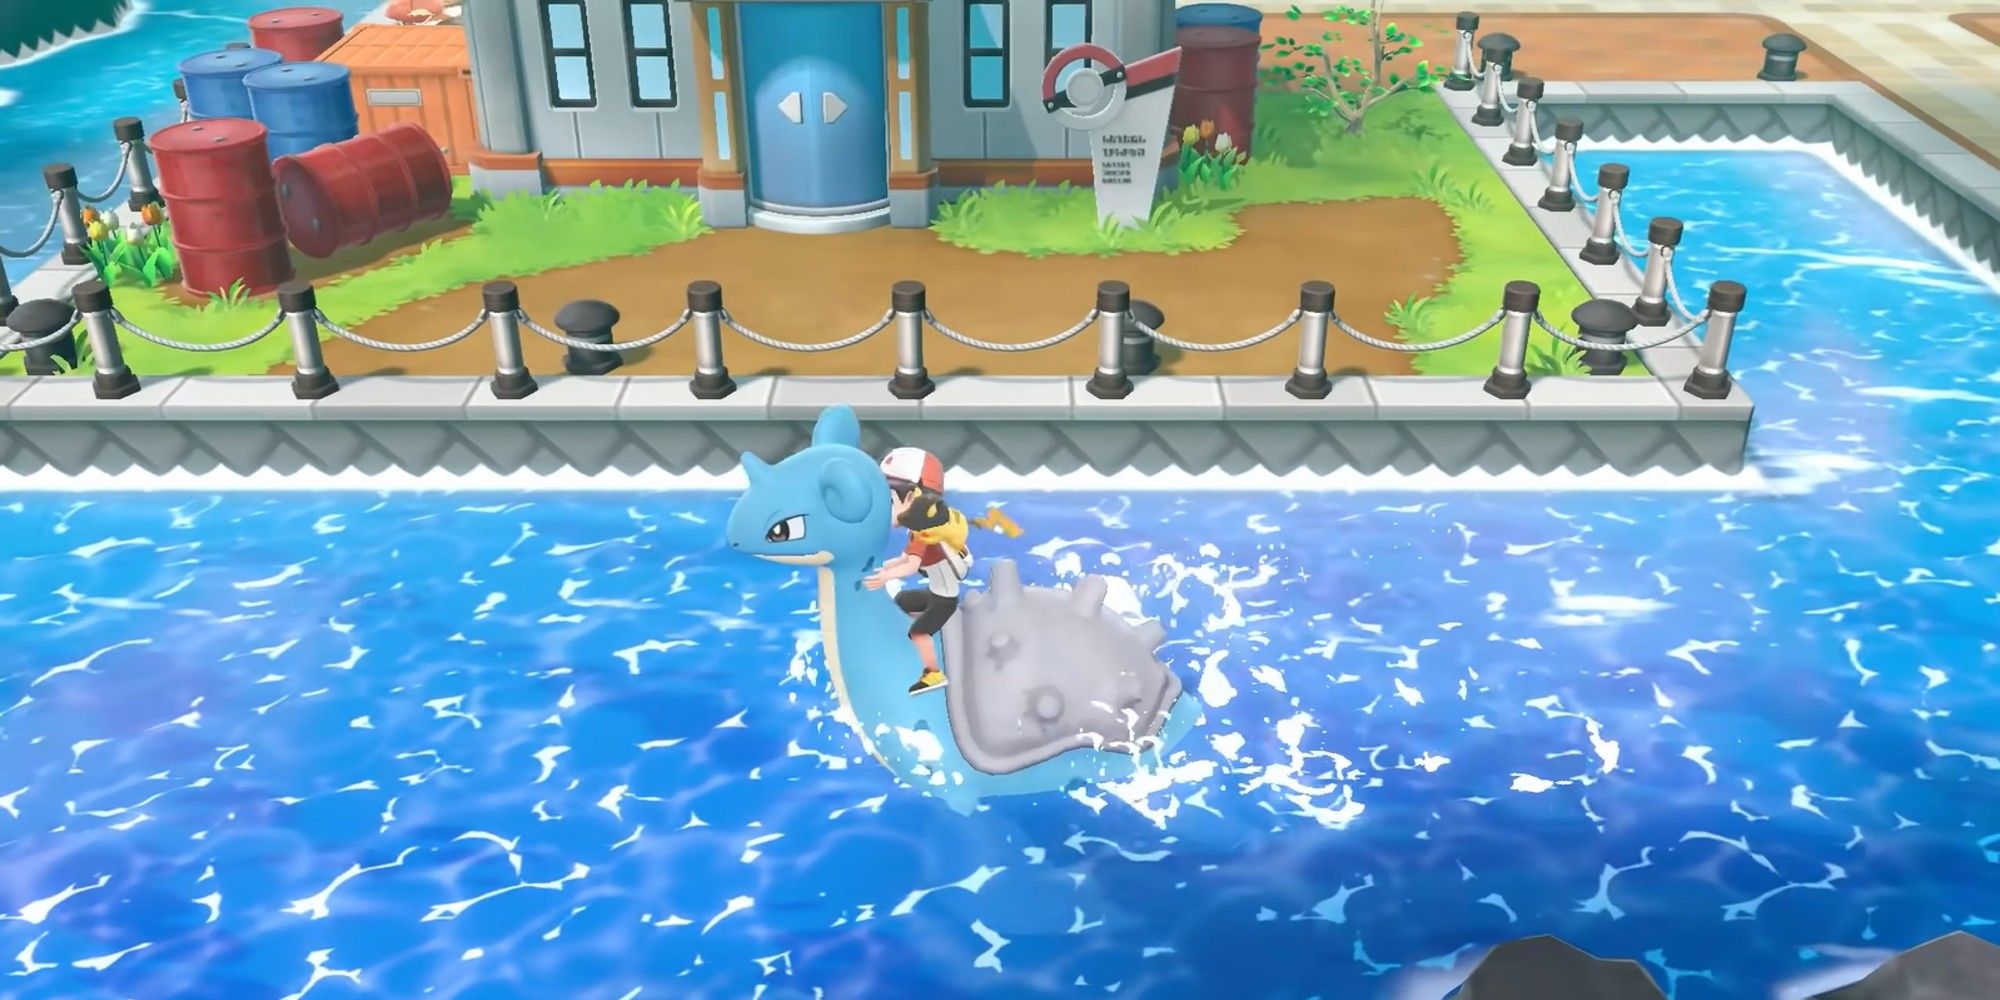 Lapras from Pokemon Let's Go Eevee & Let's Go Pikachu, swimming on water